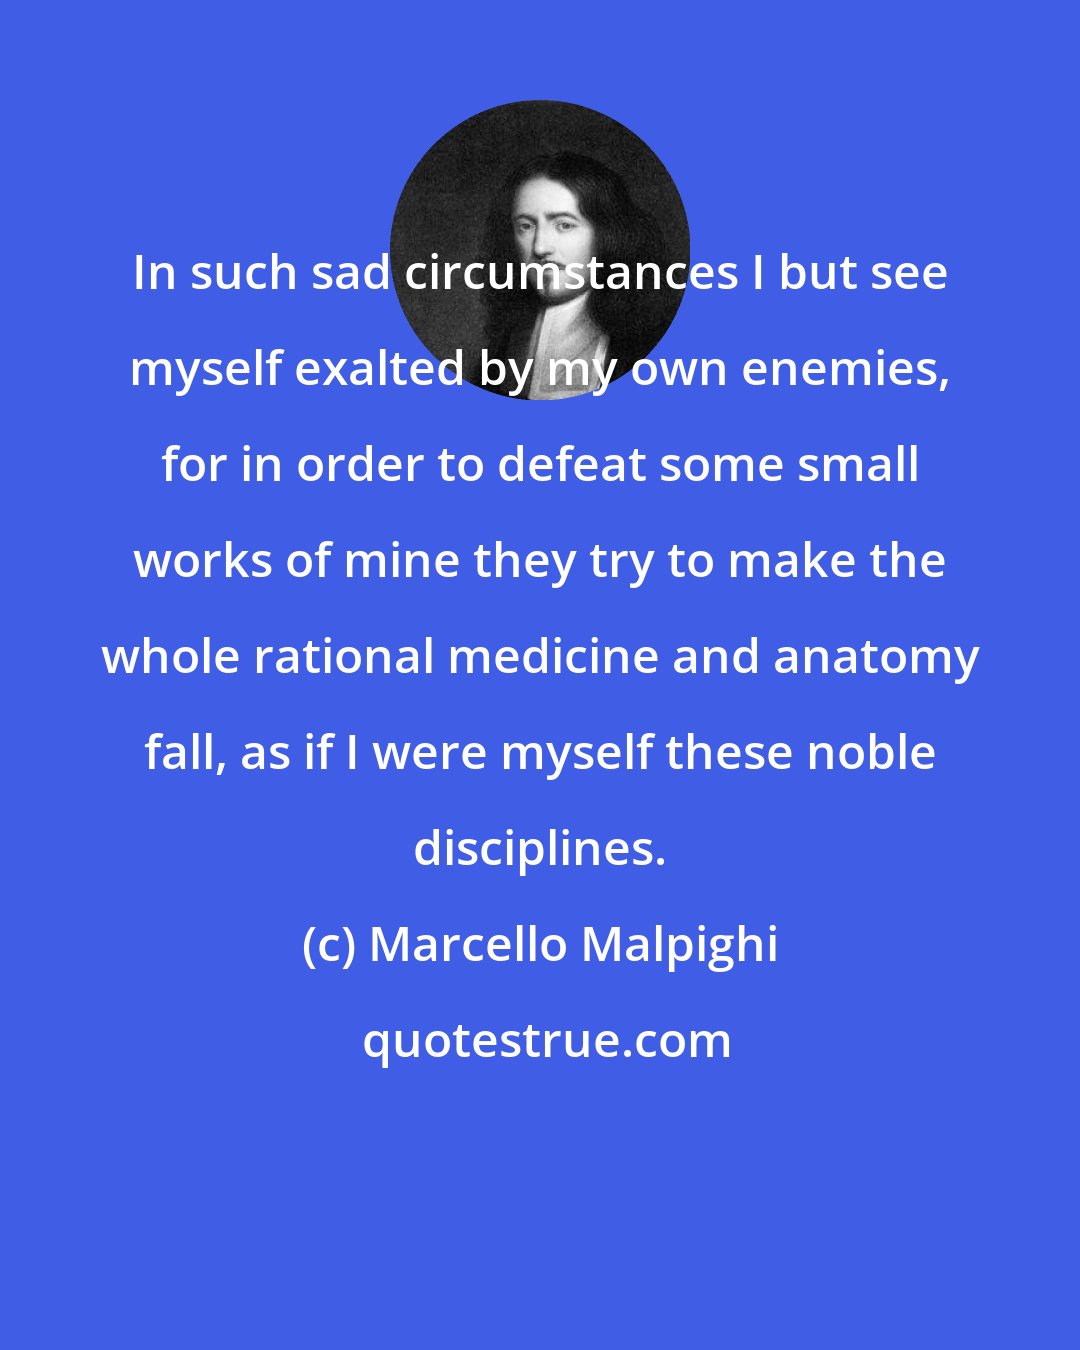 Marcello Malpighi: In such sad circumstances I but see myself exalted by my own enemies, for in order to defeat some small works of mine they try to make the whole rational medicine and anatomy fall, as if I were myself these noble disciplines.